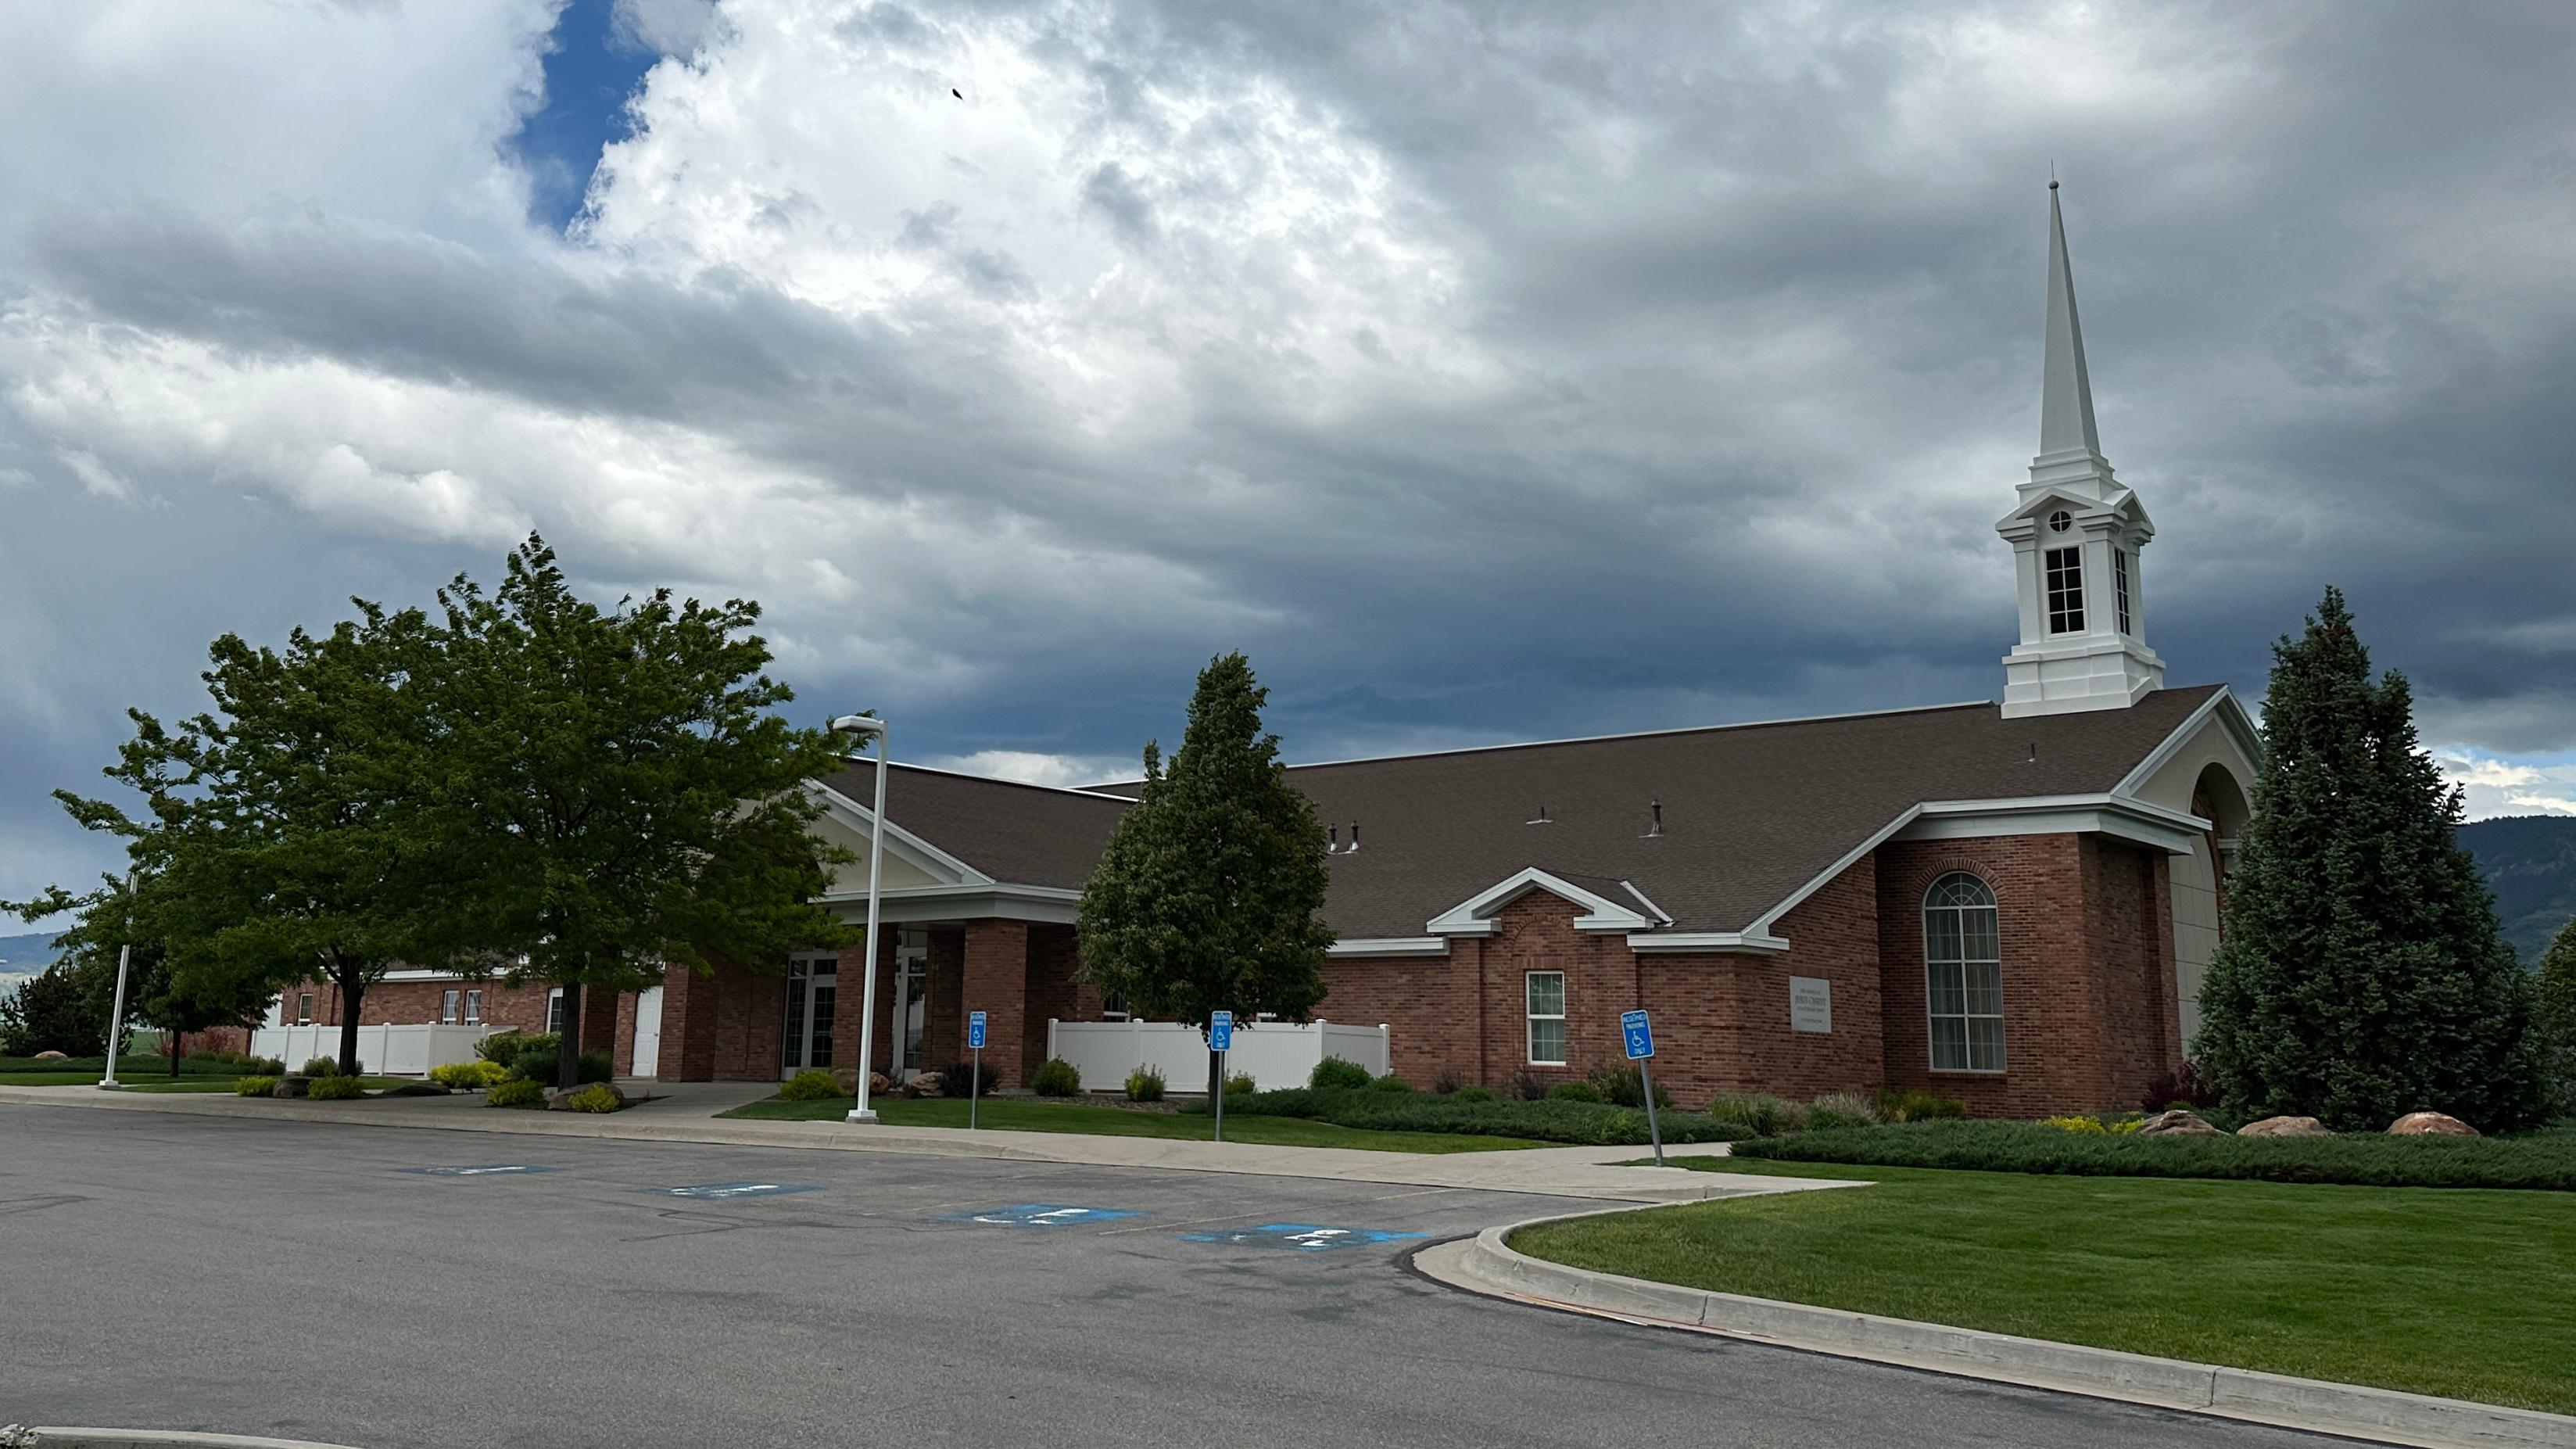 The Niter building in the Grace Idaho Stake of the Church of Jesus Christ of Latter-day Saints.